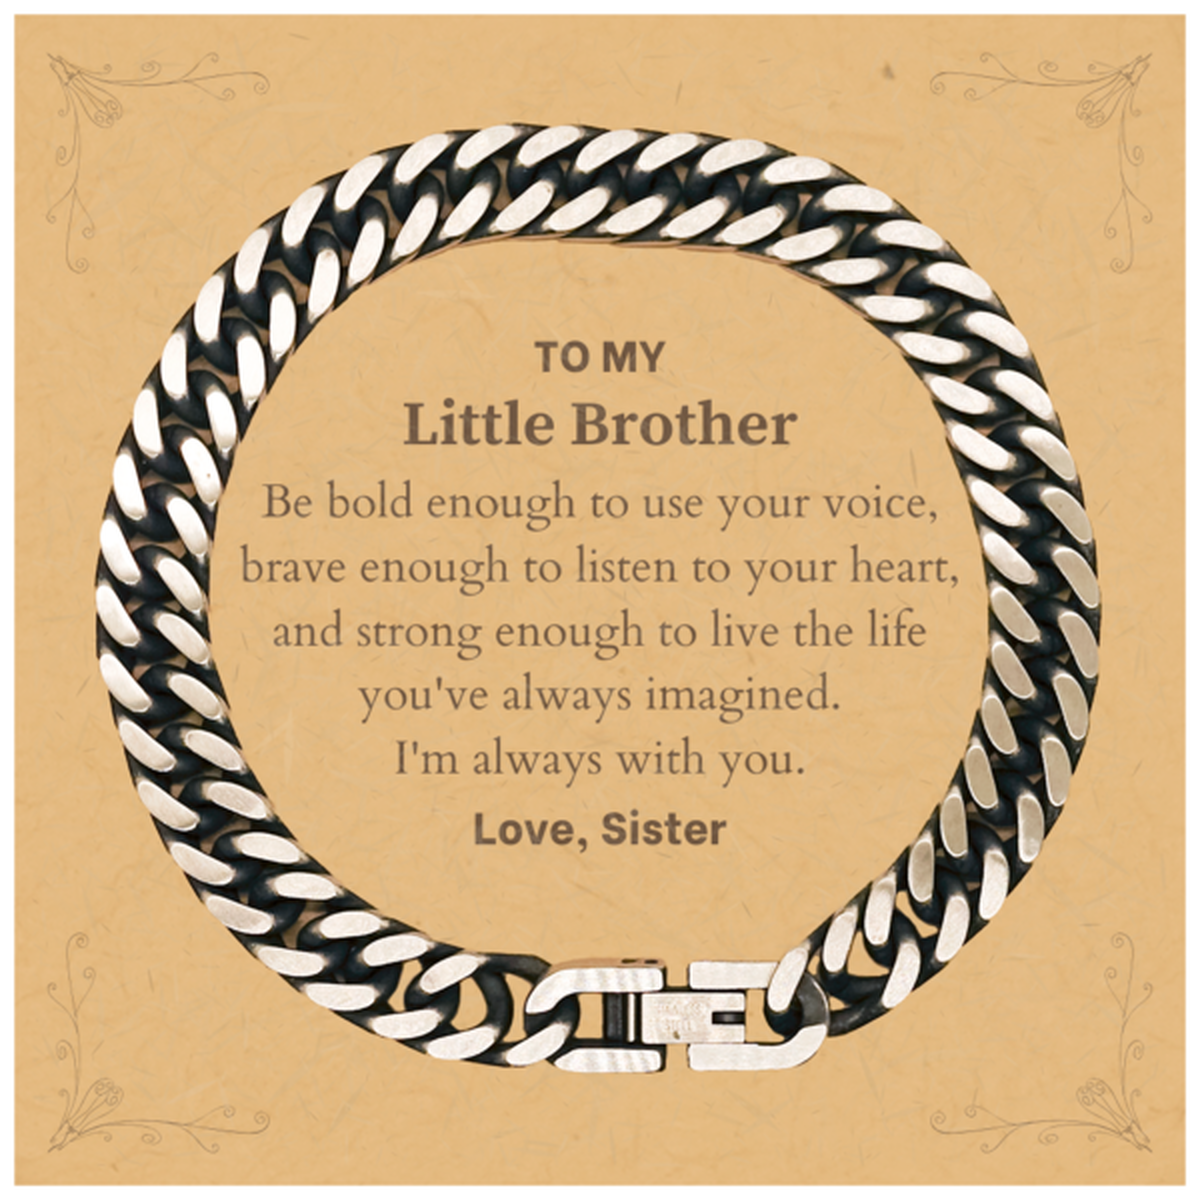 Keepsake Little Brother Cuban Link Chain Bracelet Gift Idea Graduation Christmas Birthday Little Brother from Sister, Little Brother Be bold enough to use your voice, brave enough to listen to your heart. Love, Sister